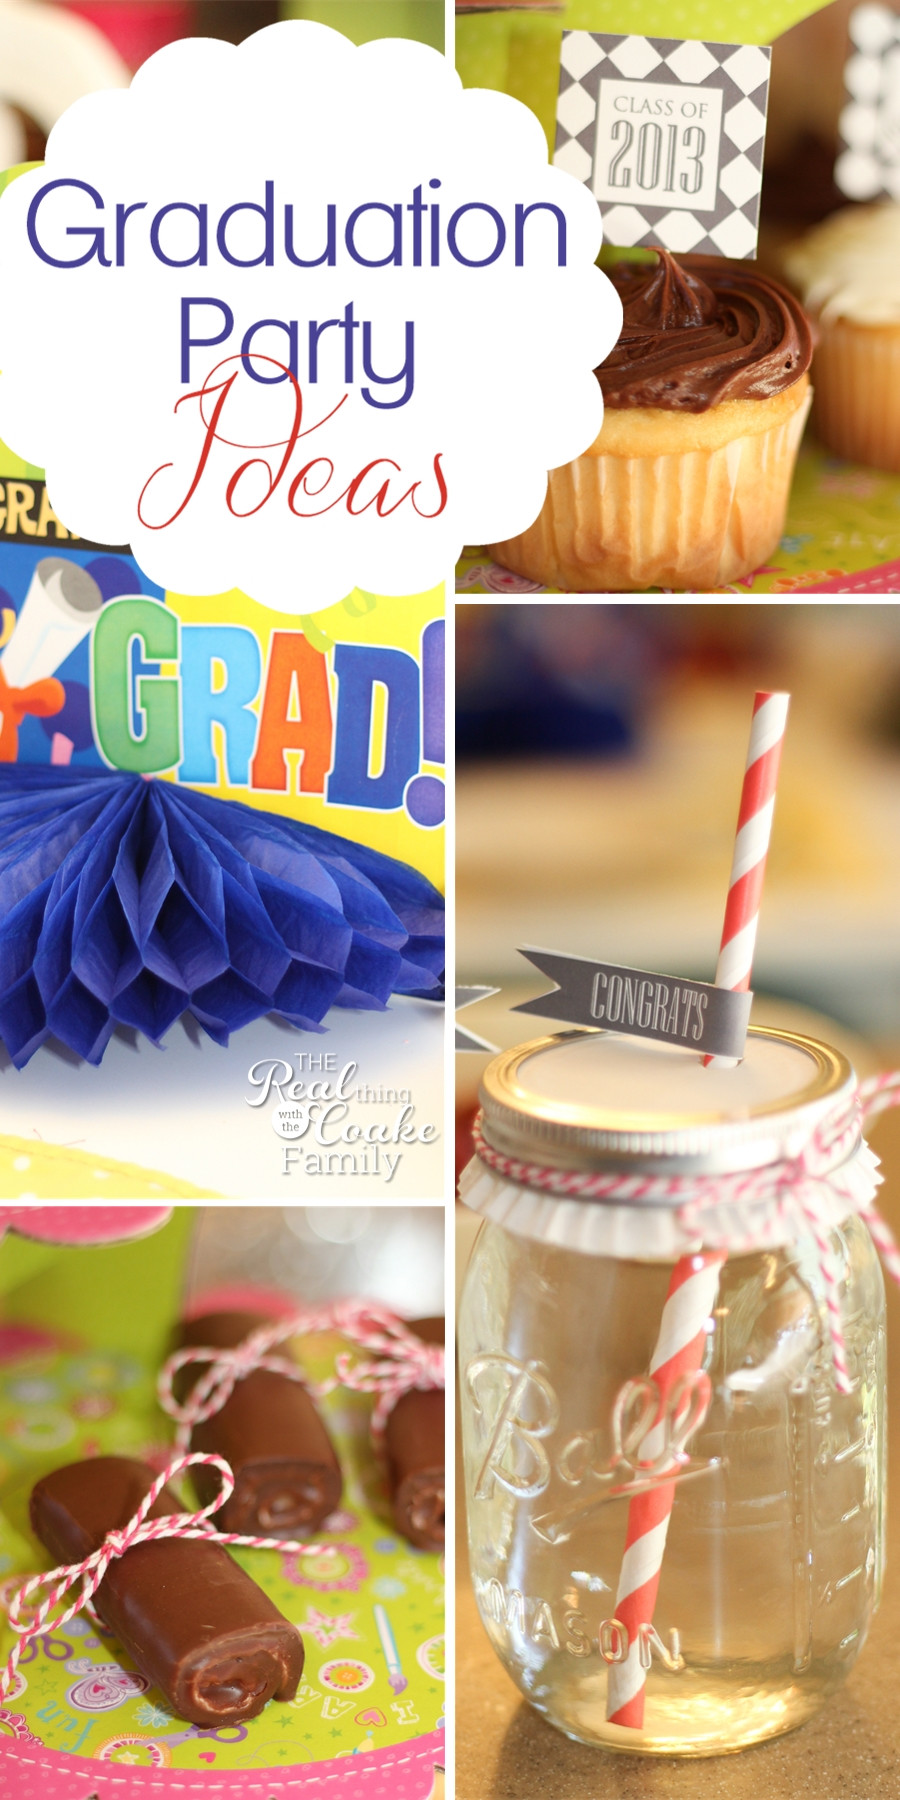 Graduation Party Program Ideas
 Quick Easy and Cute Graduation Party Ideas The Real